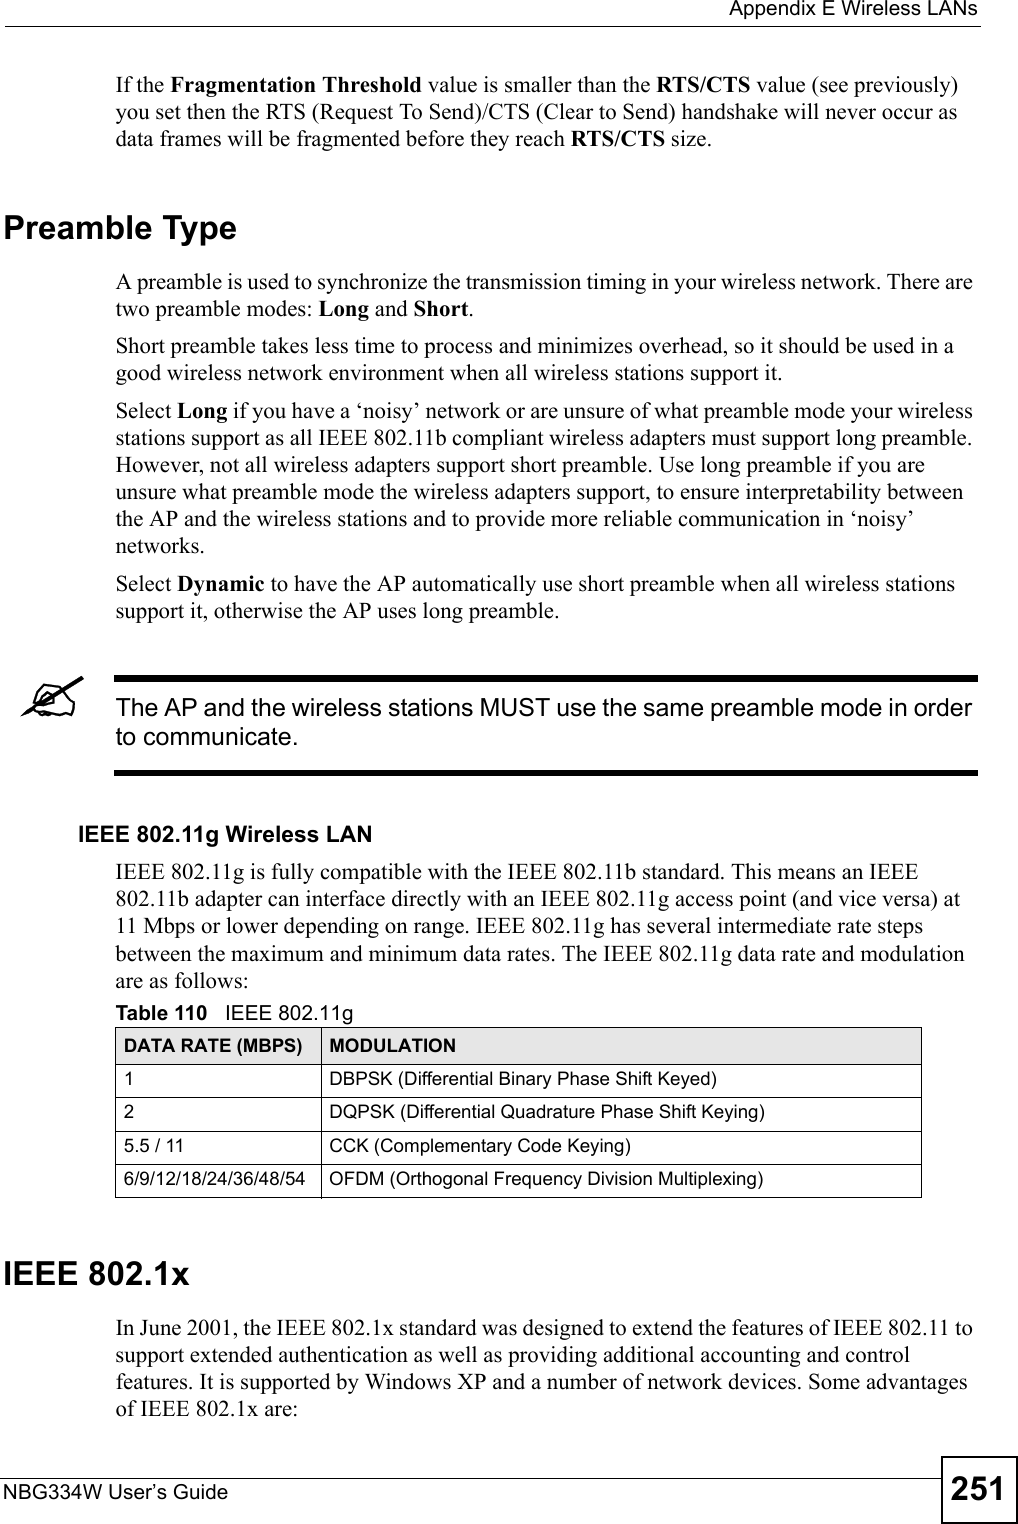  Appendix E Wireless LANsNBG334W User’s Guide 251If the Fragmentation Threshold value is smaller than the RTS/CTS value (see previously) you set then the RTS (Request To Send)/CTS (Clear to Send) handshake will never occur as data frames will be fragmented before they reach RTS/CTS size.Preamble TypeA preamble is used to synchronize the transmission timing in your wireless network. There are two preamble modes: Long and Short. Short preamble takes less time to process and minimizes overhead, so it should be used in a good wireless network environment when all wireless stations support it. Select Long if you have a ‘noisy’ network or are unsure of what preamble mode your wireless stations support as all IEEE 802.11b compliant wireless adapters must support long preamble. However, not all wireless adapters support short preamble. Use long preamble if you are unsure what preamble mode the wireless adapters support, to ensure interpretability between the AP and the wireless stations and to provide more reliable communication in ‘noisy’ networks. Select Dynamic to have the AP automatically use short preamble when all wireless stations support it, otherwise the AP uses long preamble.&quot;The AP and the wireless stations MUST use the same preamble mode in order to communicate.IEEE 802.11g Wireless LANIEEE 802.11g is fully compatible with the IEEE 802.11b standard. This means an IEEE 802.11b adapter can interface directly with an IEEE 802.11g access point (and vice versa) at 11 Mbps or lower depending on range. IEEE 802.11g has several intermediate rate steps between the maximum and minimum data rates. The IEEE 802.11g data rate and modulation are as follows:IEEE 802.1xIn June 2001, the IEEE 802.1x standard was designed to extend the features of IEEE 802.11 to support extended authentication as well as providing additional accounting and control features. It is supported by Windows XP and a number of network devices. Some advantages of IEEE 802.1x are:Table 110   IEEE 802.11gDATA RATE (MBPS) MODULATION1 DBPSK (Differential Binary Phase Shift Keyed)2 DQPSK (Differential Quadrature Phase Shift Keying)5.5 / 11 CCK (Complementary Code Keying) 6/9/12/18/24/36/48/54 OFDM (Orthogonal Frequency Division Multiplexing) 